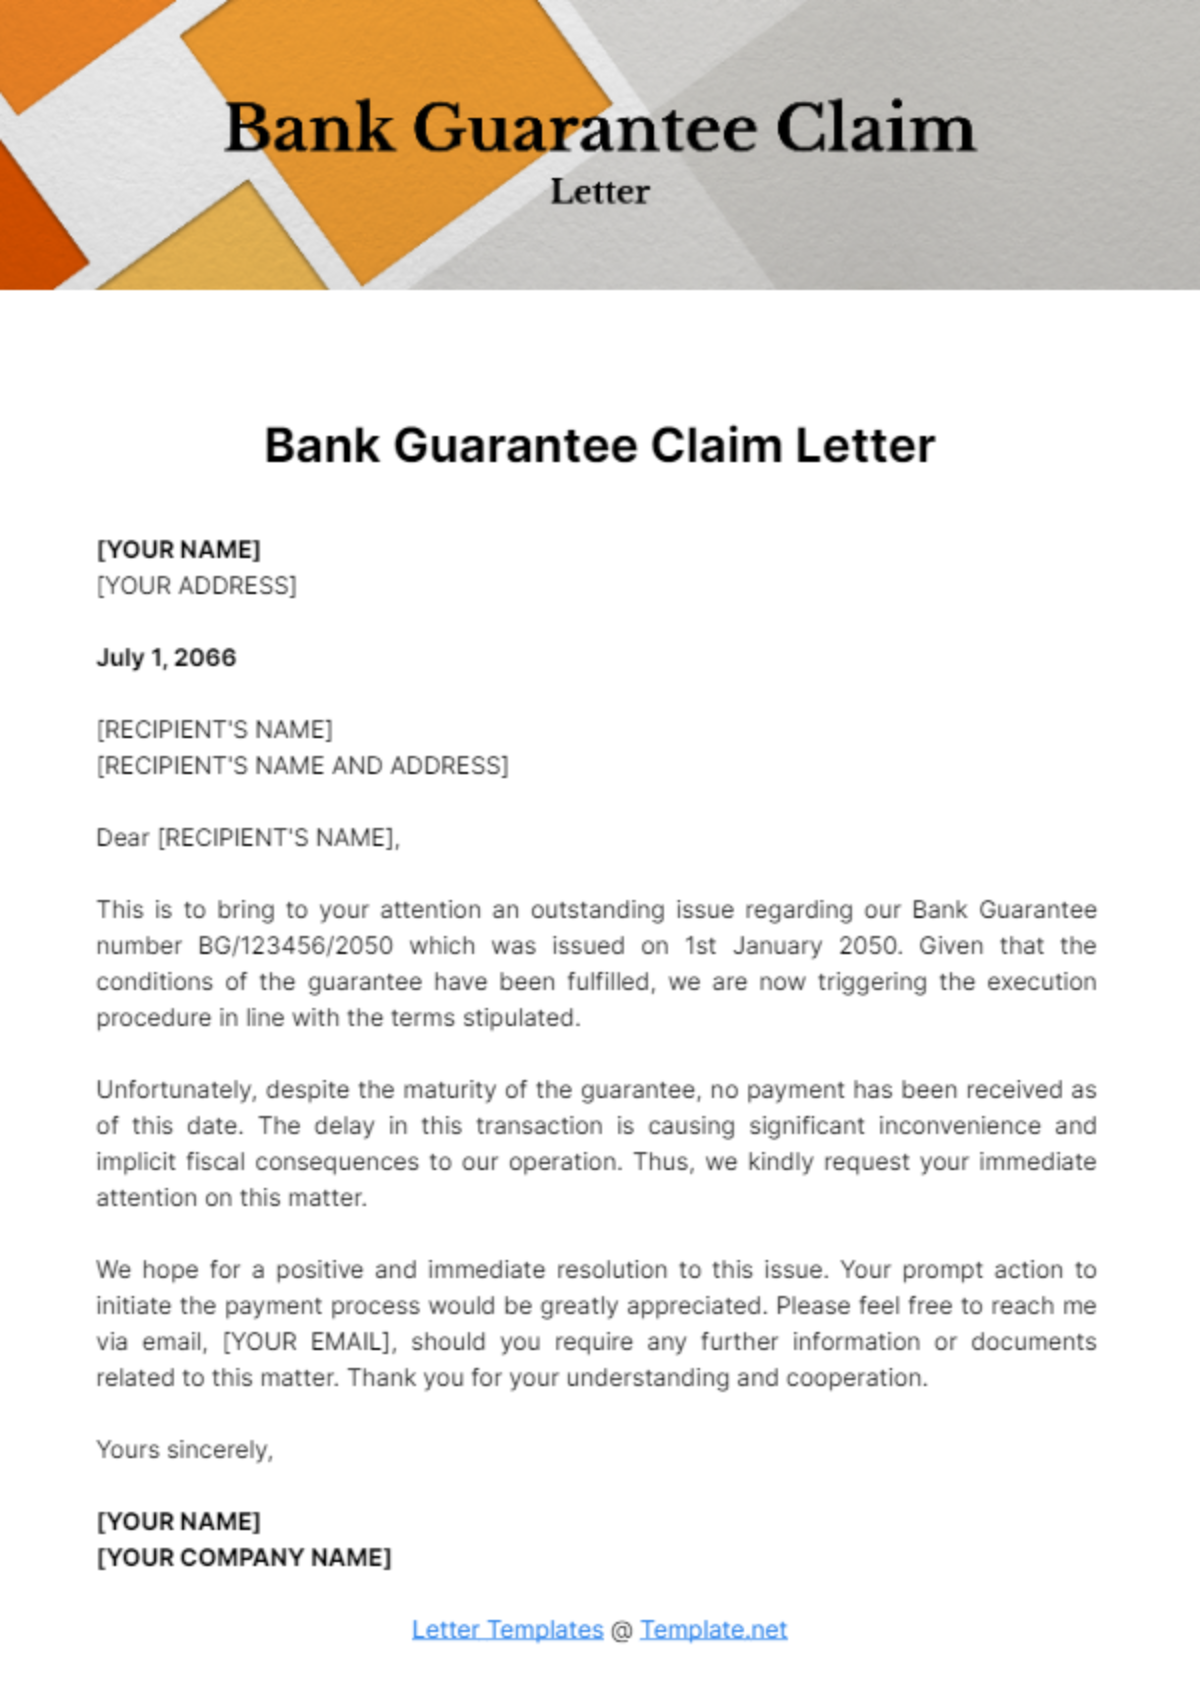 Bank Guarantee Claim Letter Template